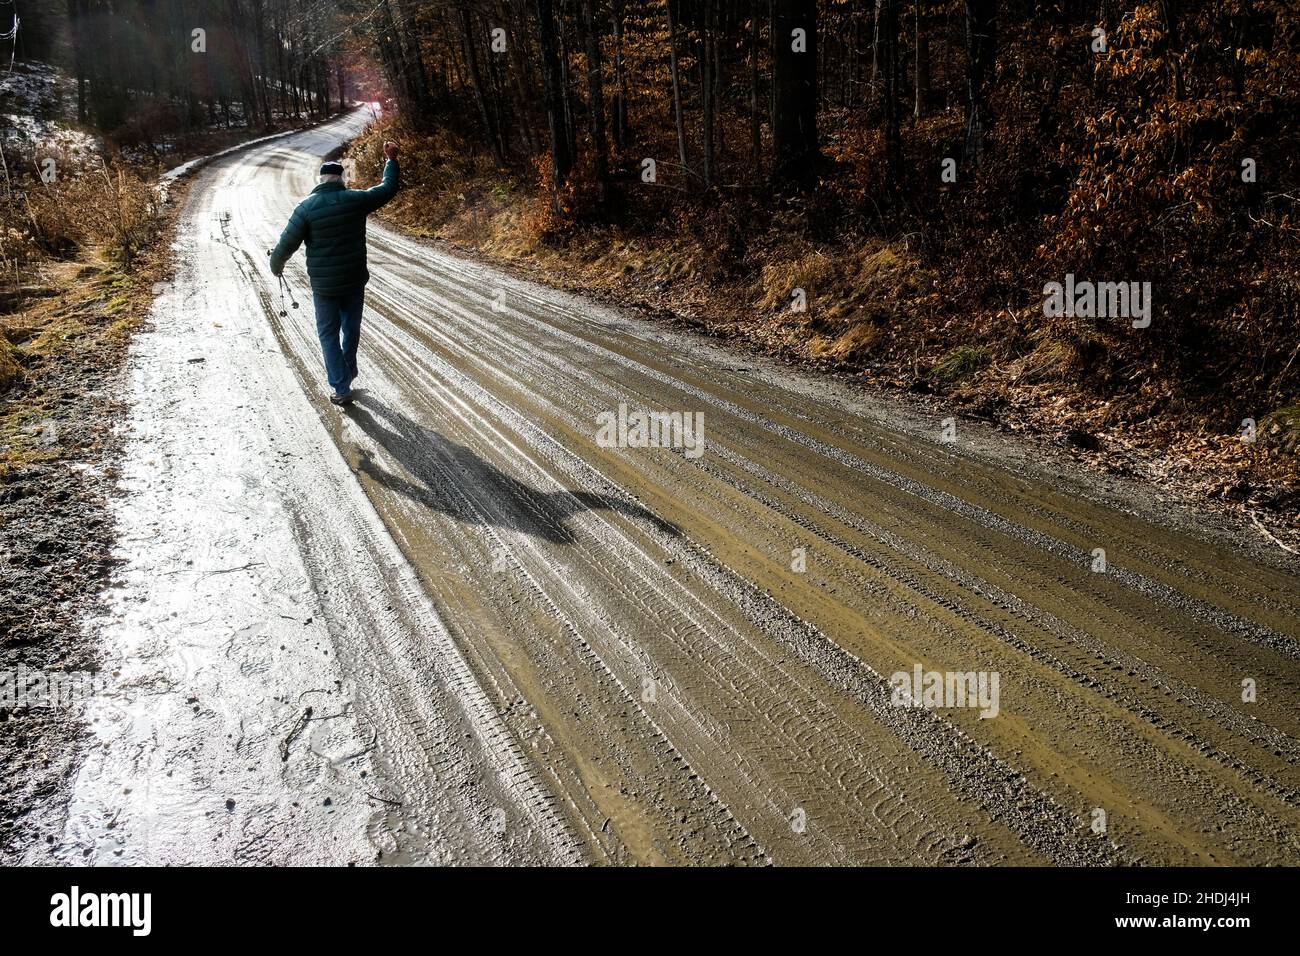 A solitary older man walks along a rural dirt road in East Montpelier, VT, New England, USA. Stock Photo